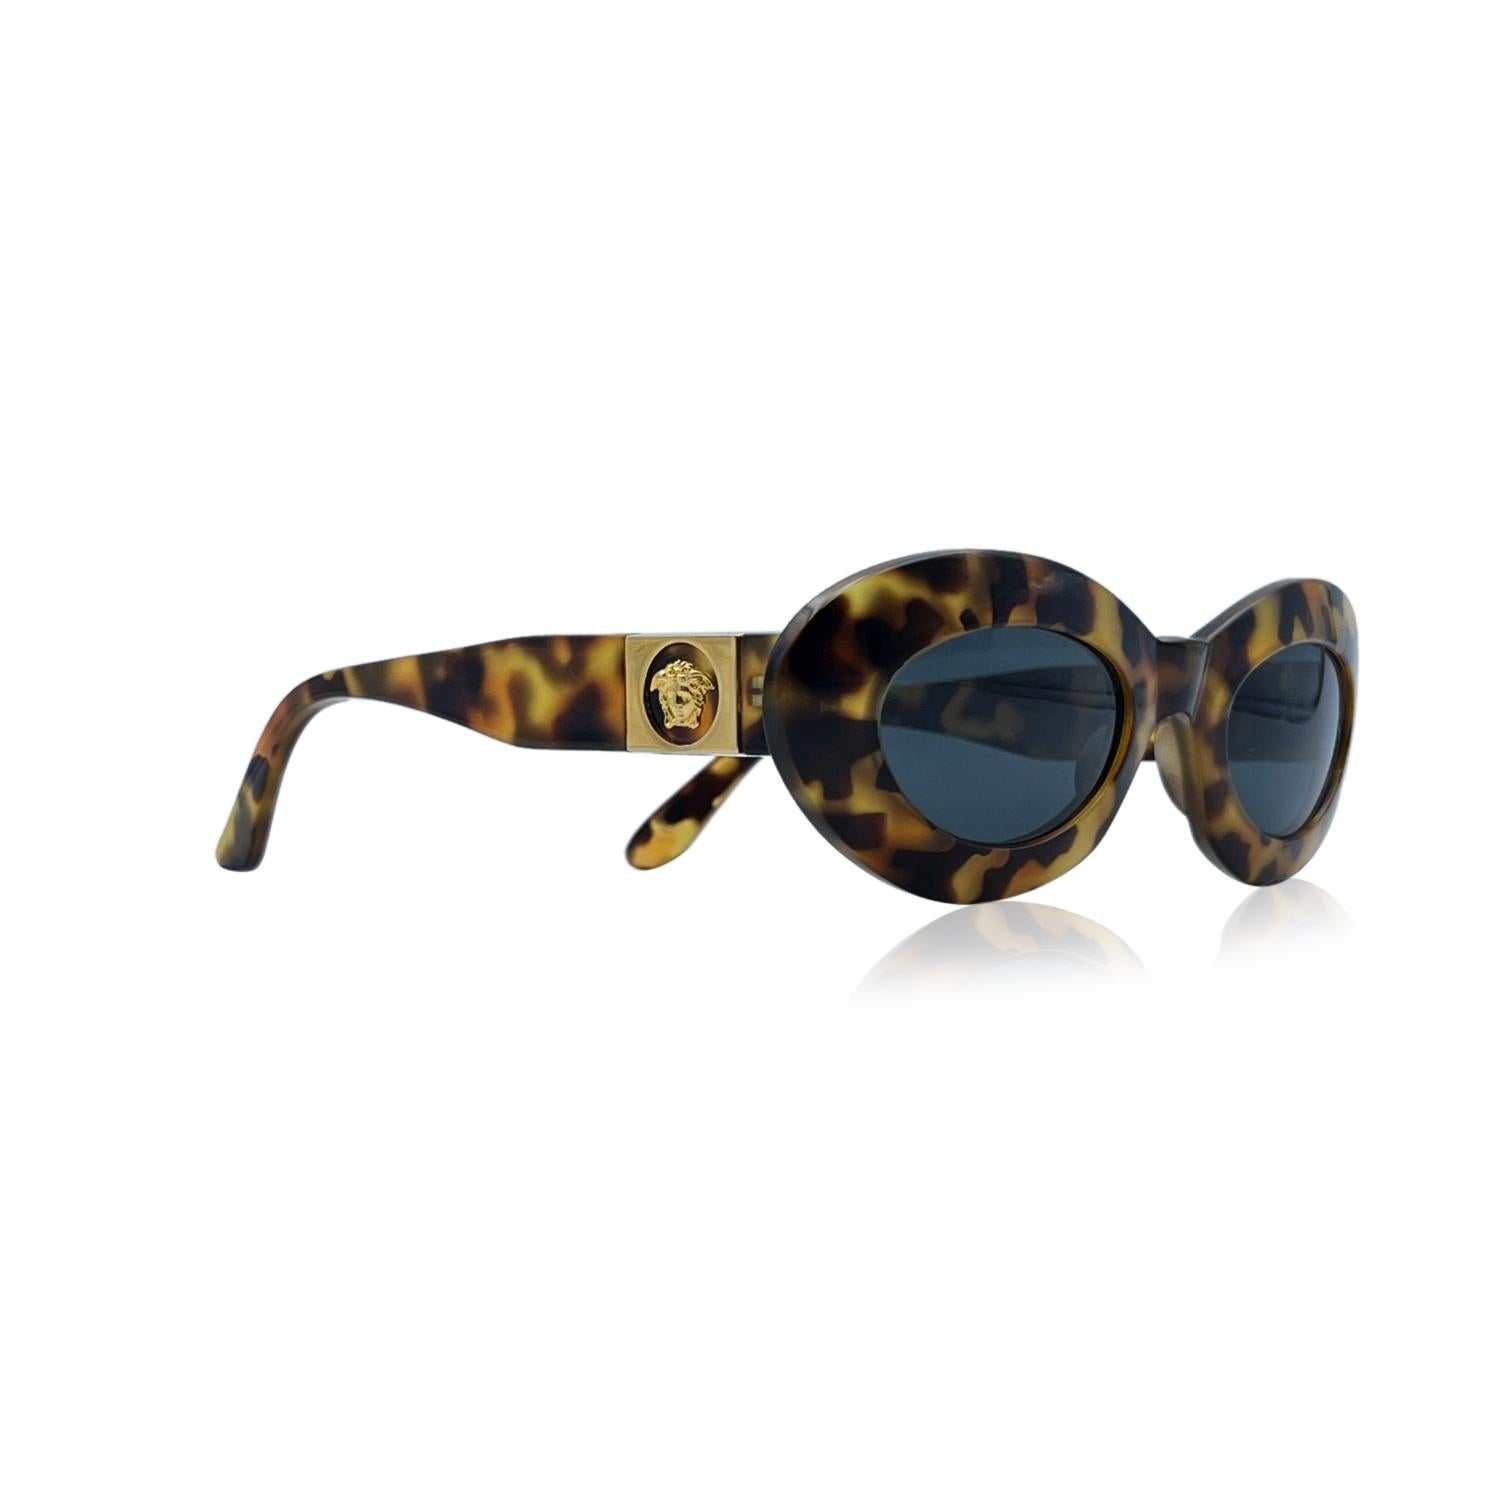 Brown oval shaped vintage sunglasses Mod. 415/C Col. 279 by Gianni Versace. Iconic 90s sunglasses with double gold metal Medusa detailing on temples. Made in Italy. Original 100% Total UVA UVB protection original grey lenses



Details

MATERIAL: